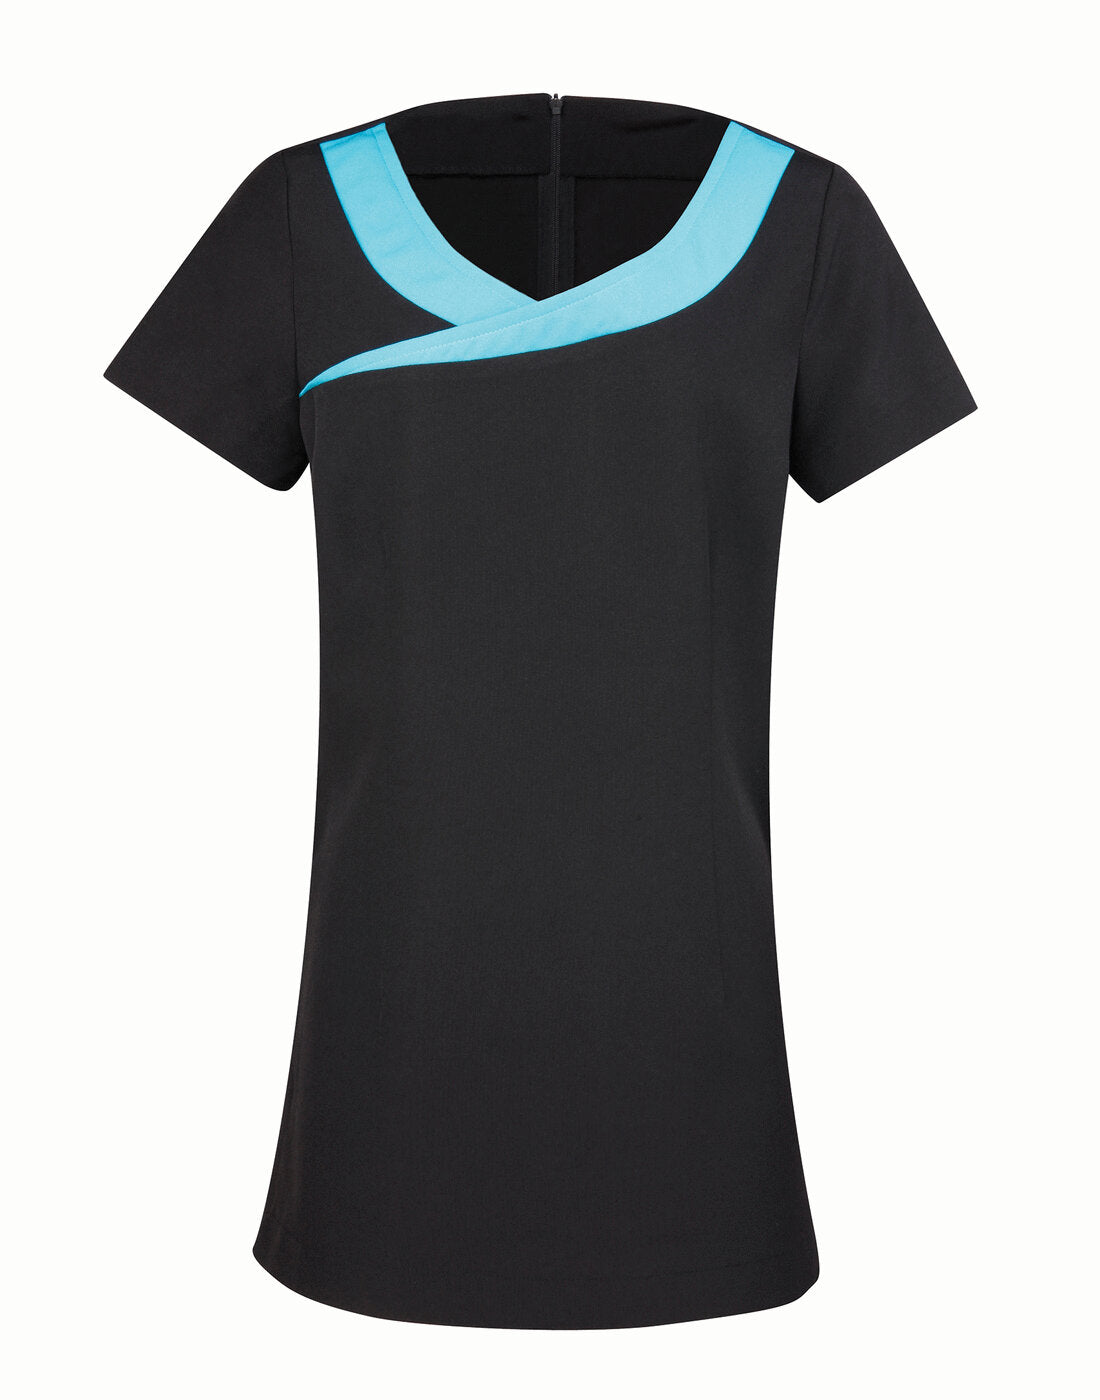 Premier 'Ivy' Beauty and Spa Tunic